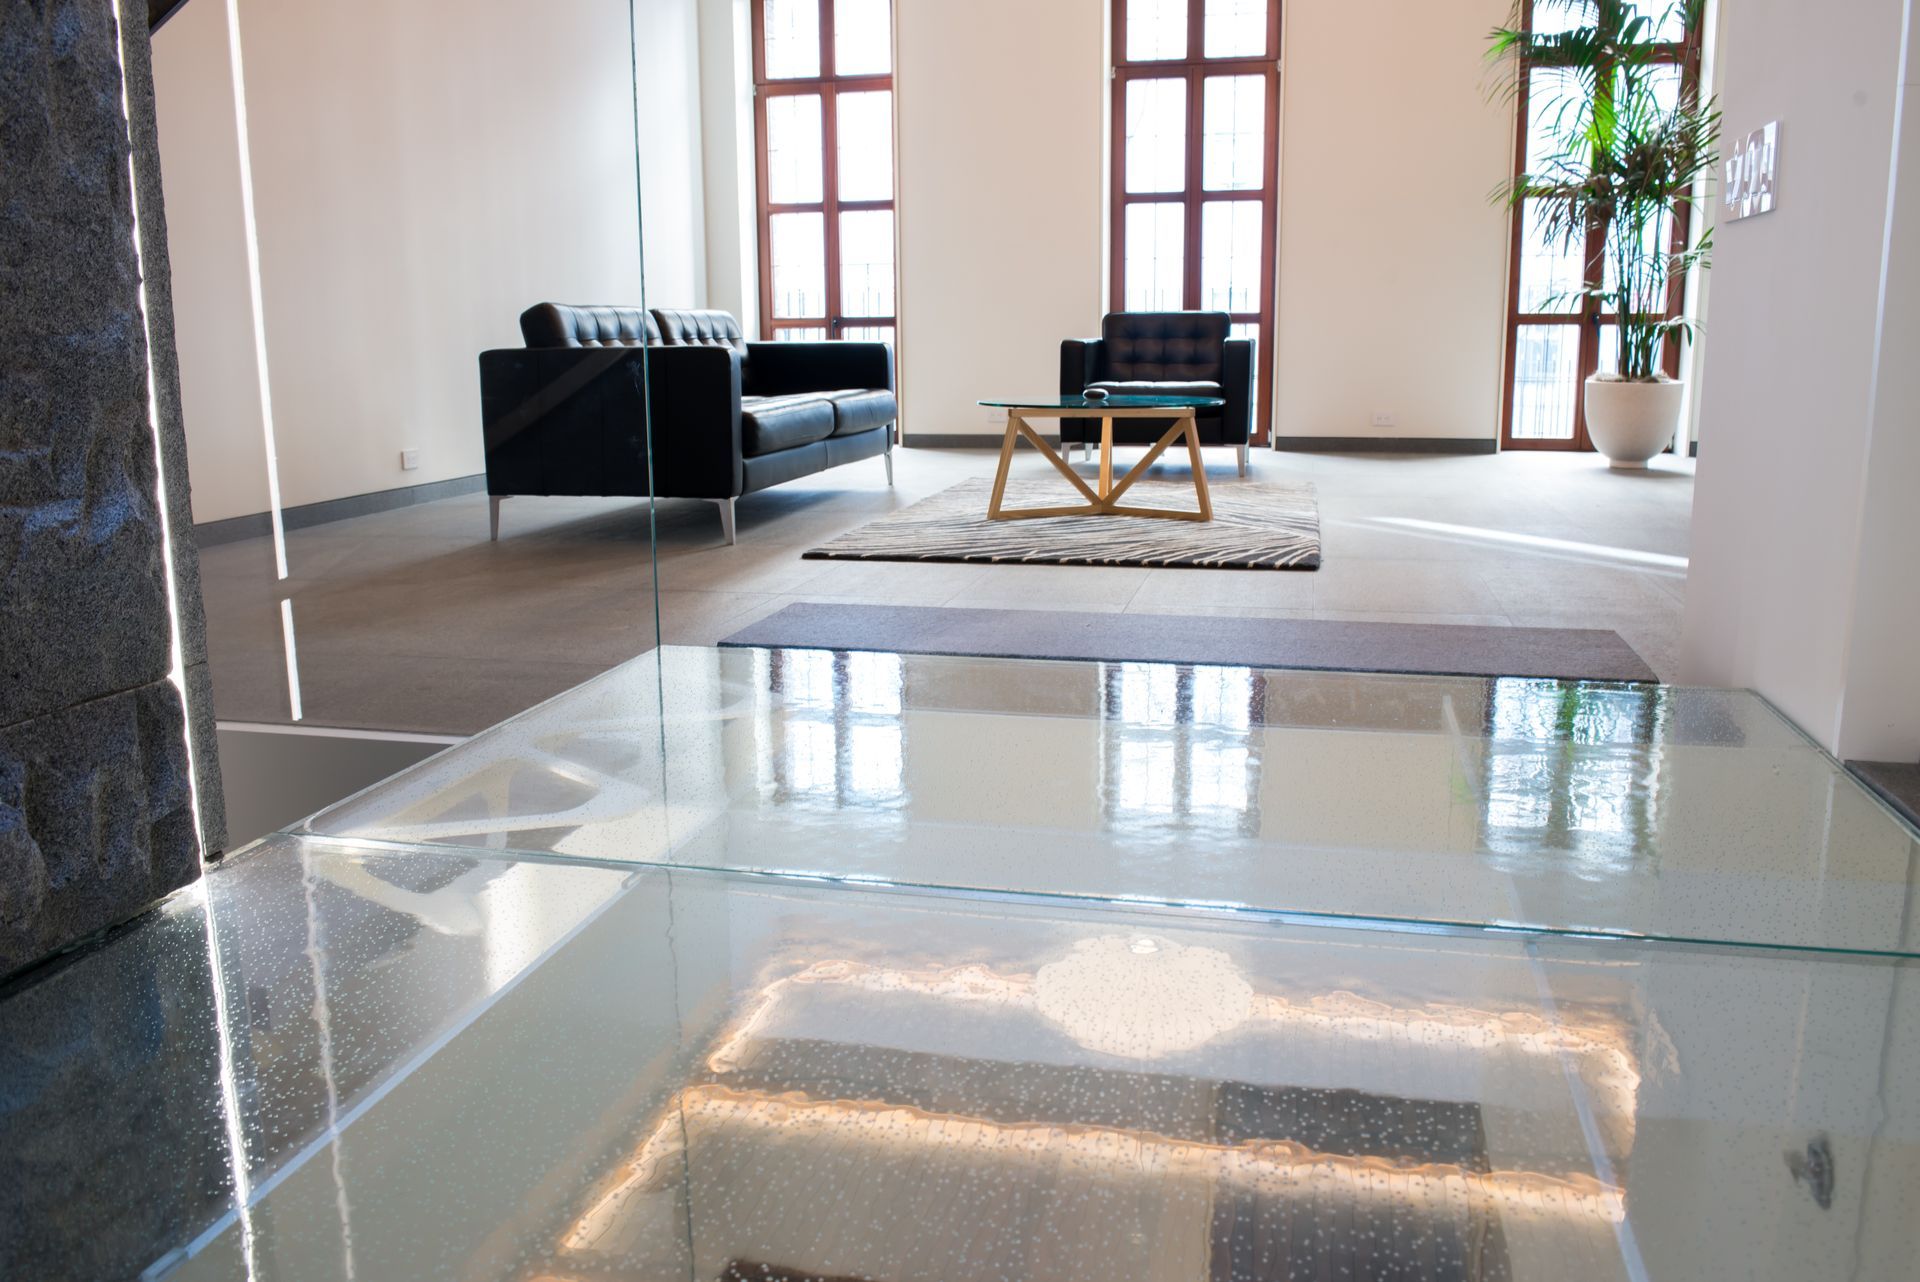 Glass flooring in an upscale New York City apartment.